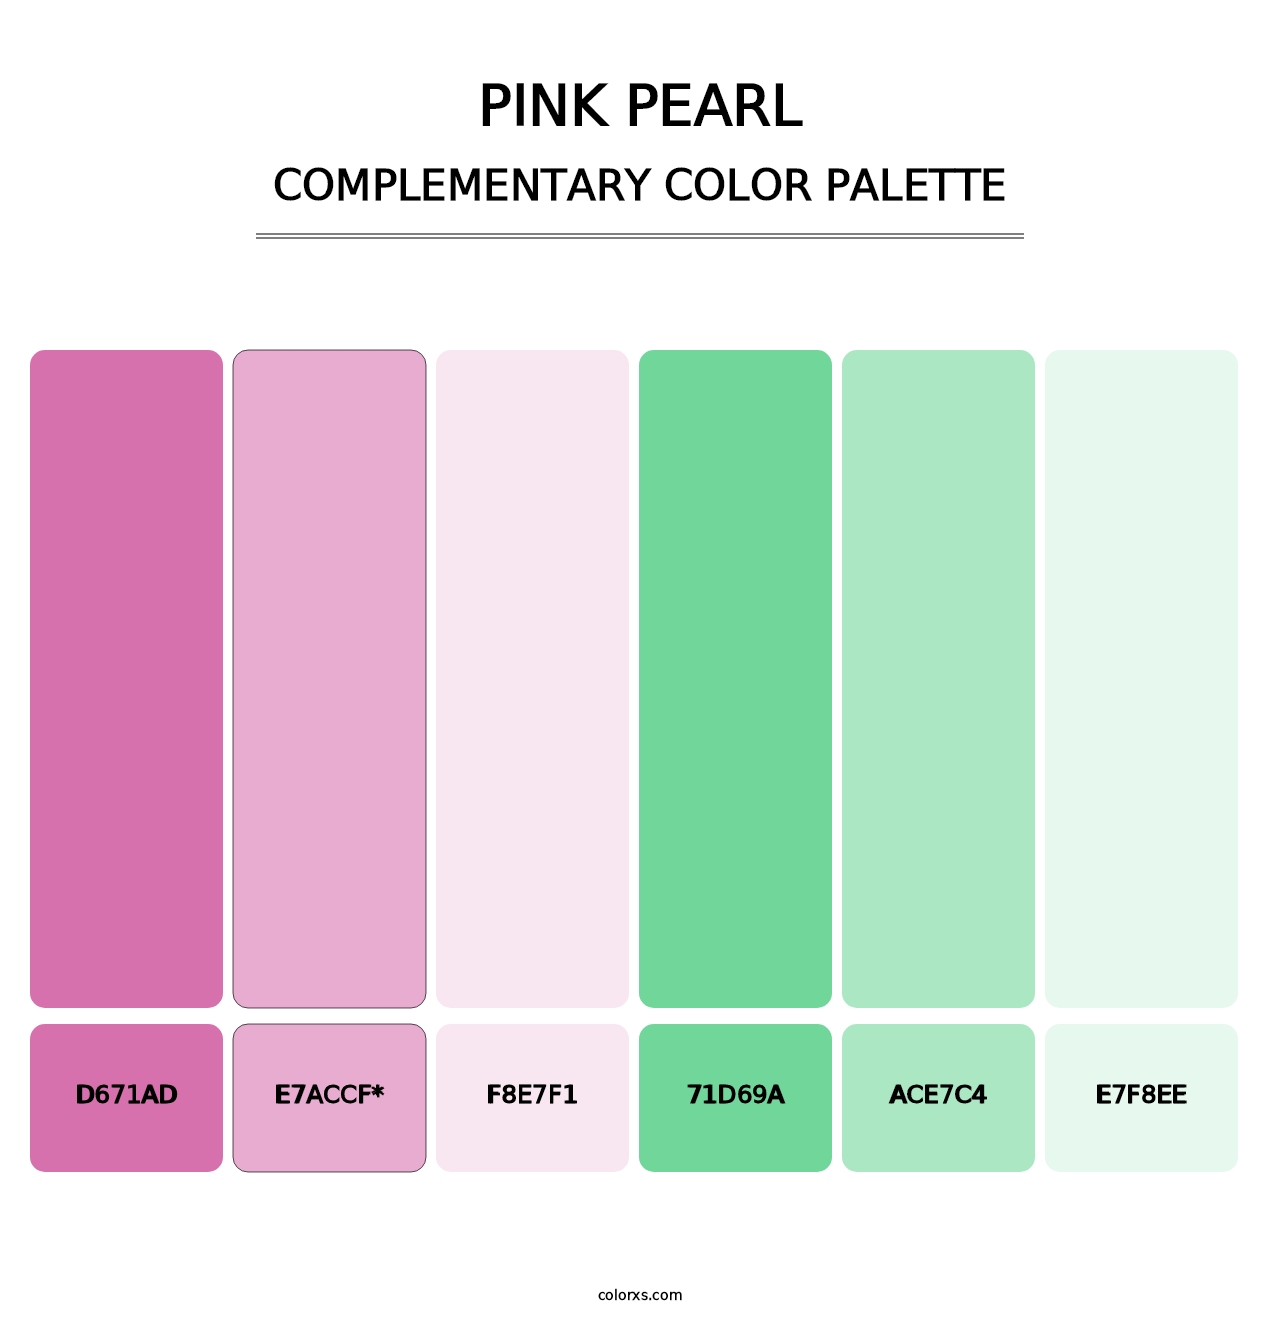 Pink Pearl - Complementary Color Palette